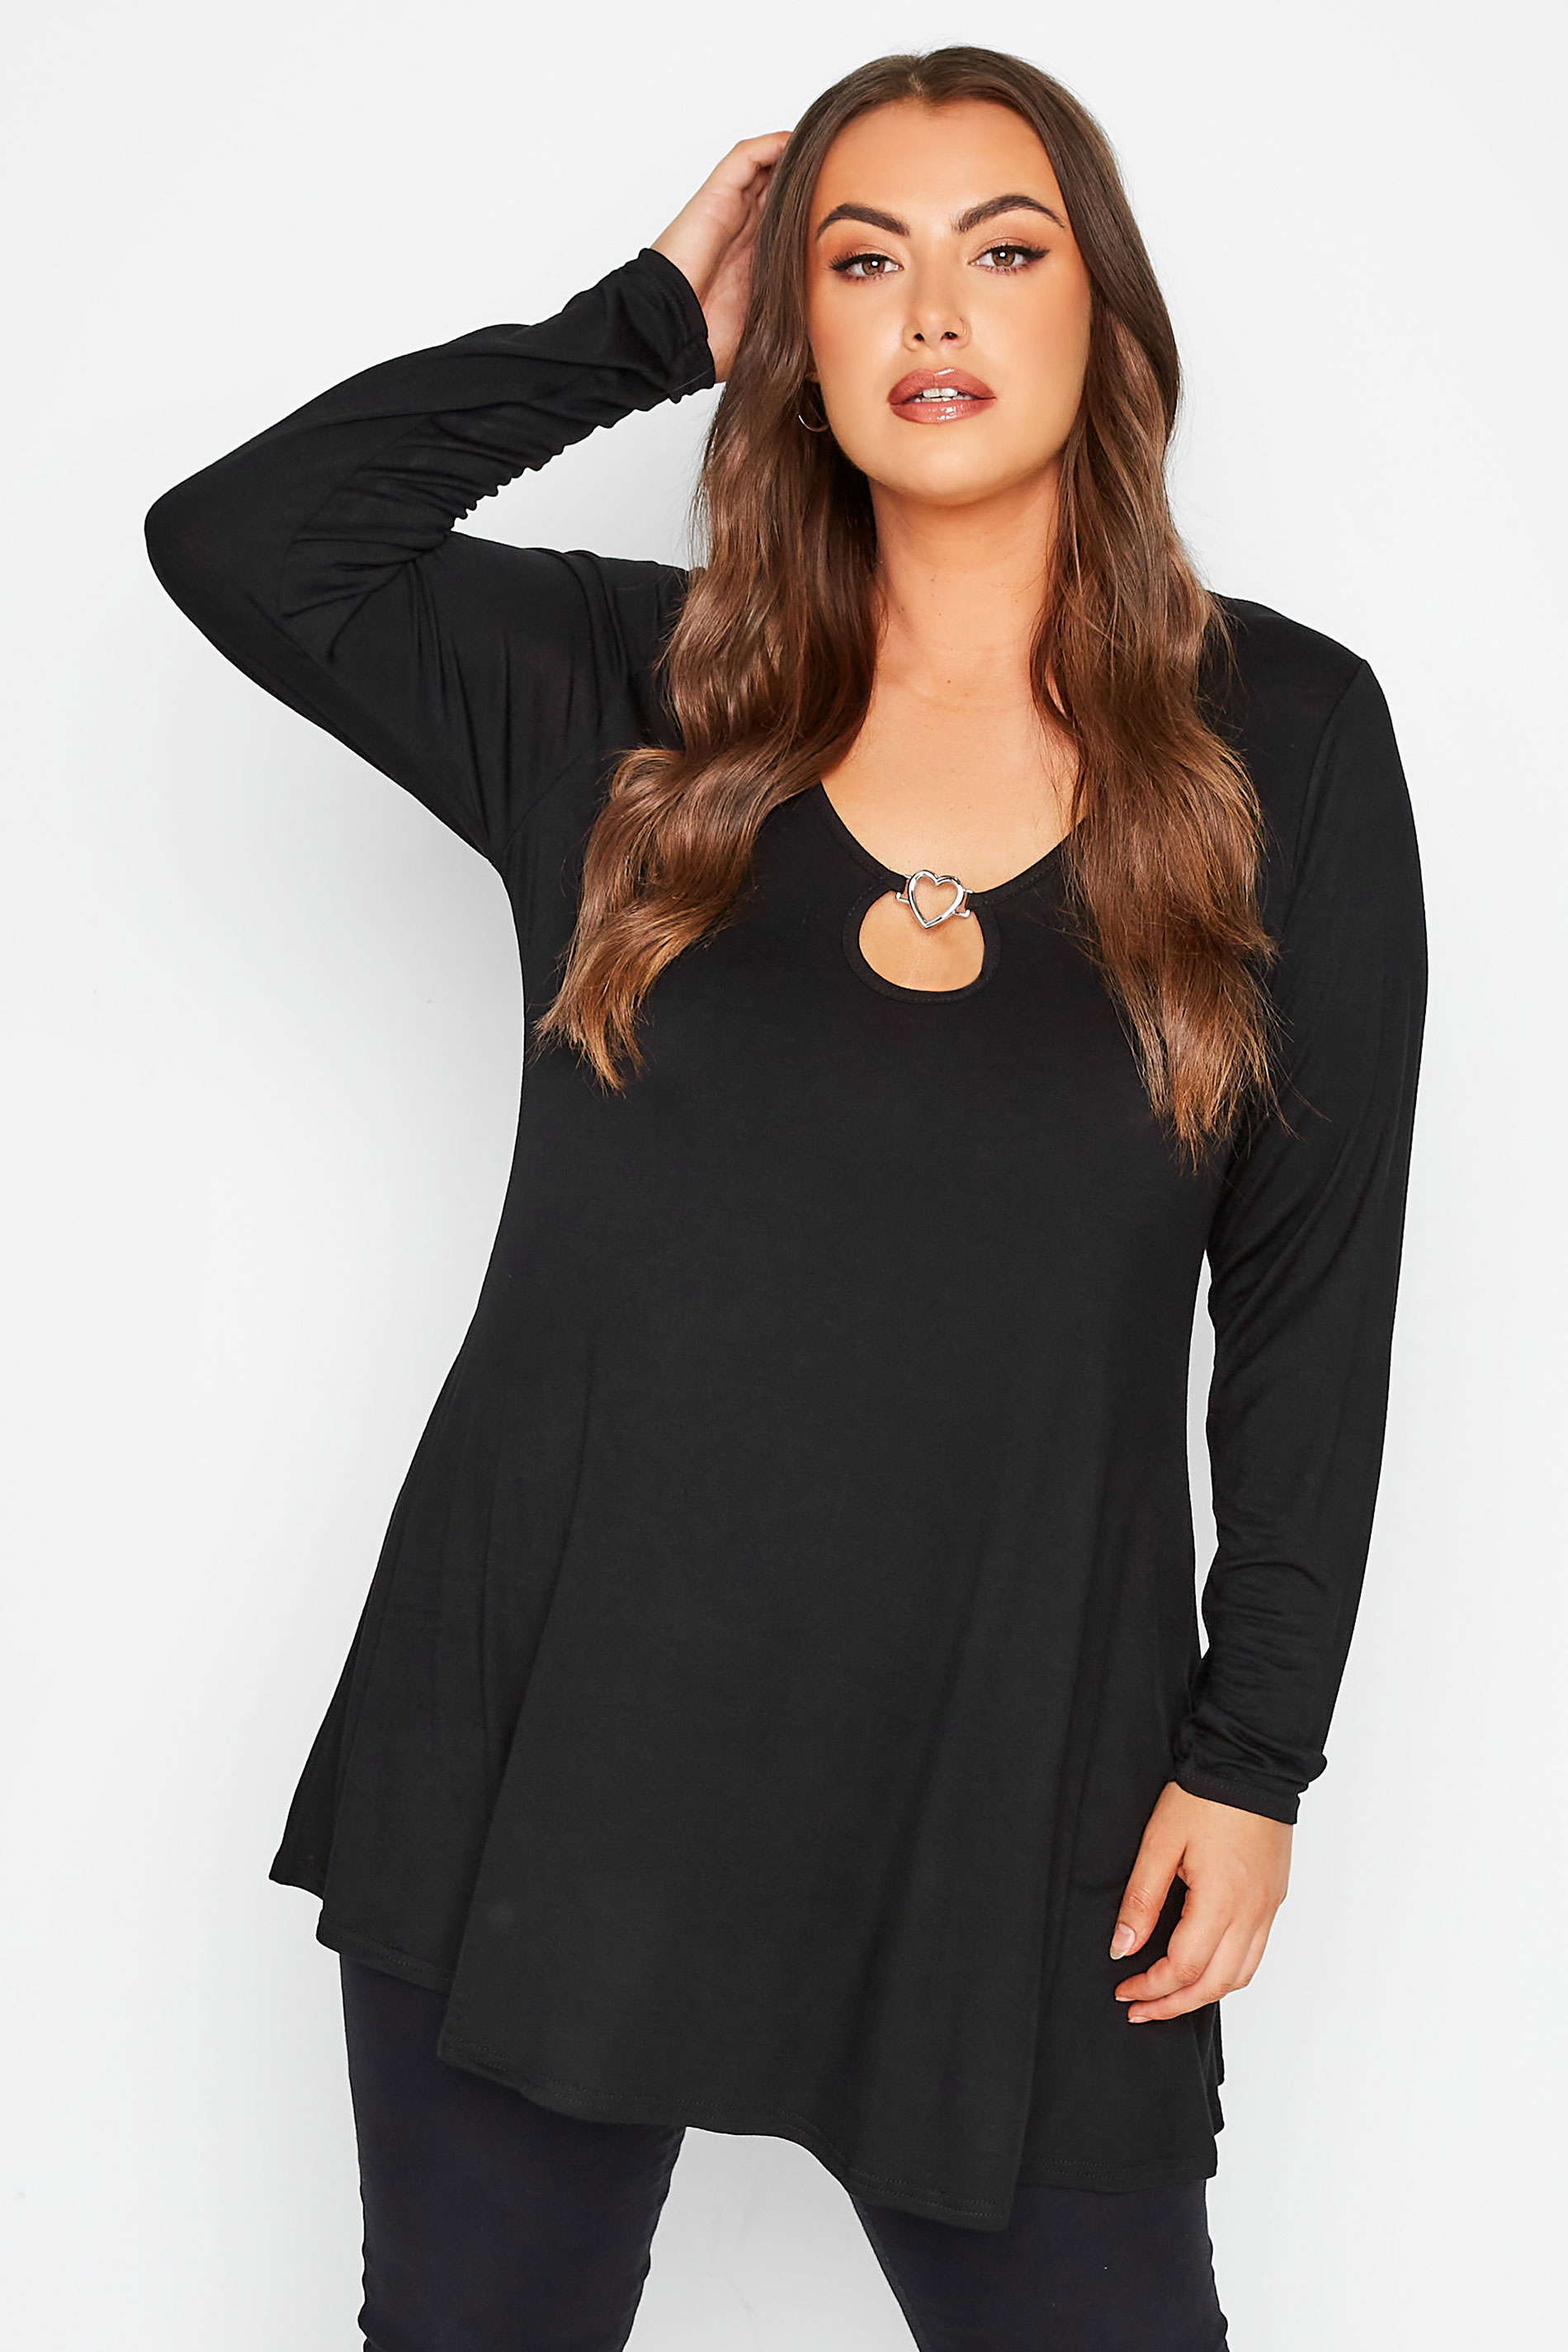 LIMITED COLLECTION Plus Size Black Heart Trim Cut Out Top | Yours Clothing 1